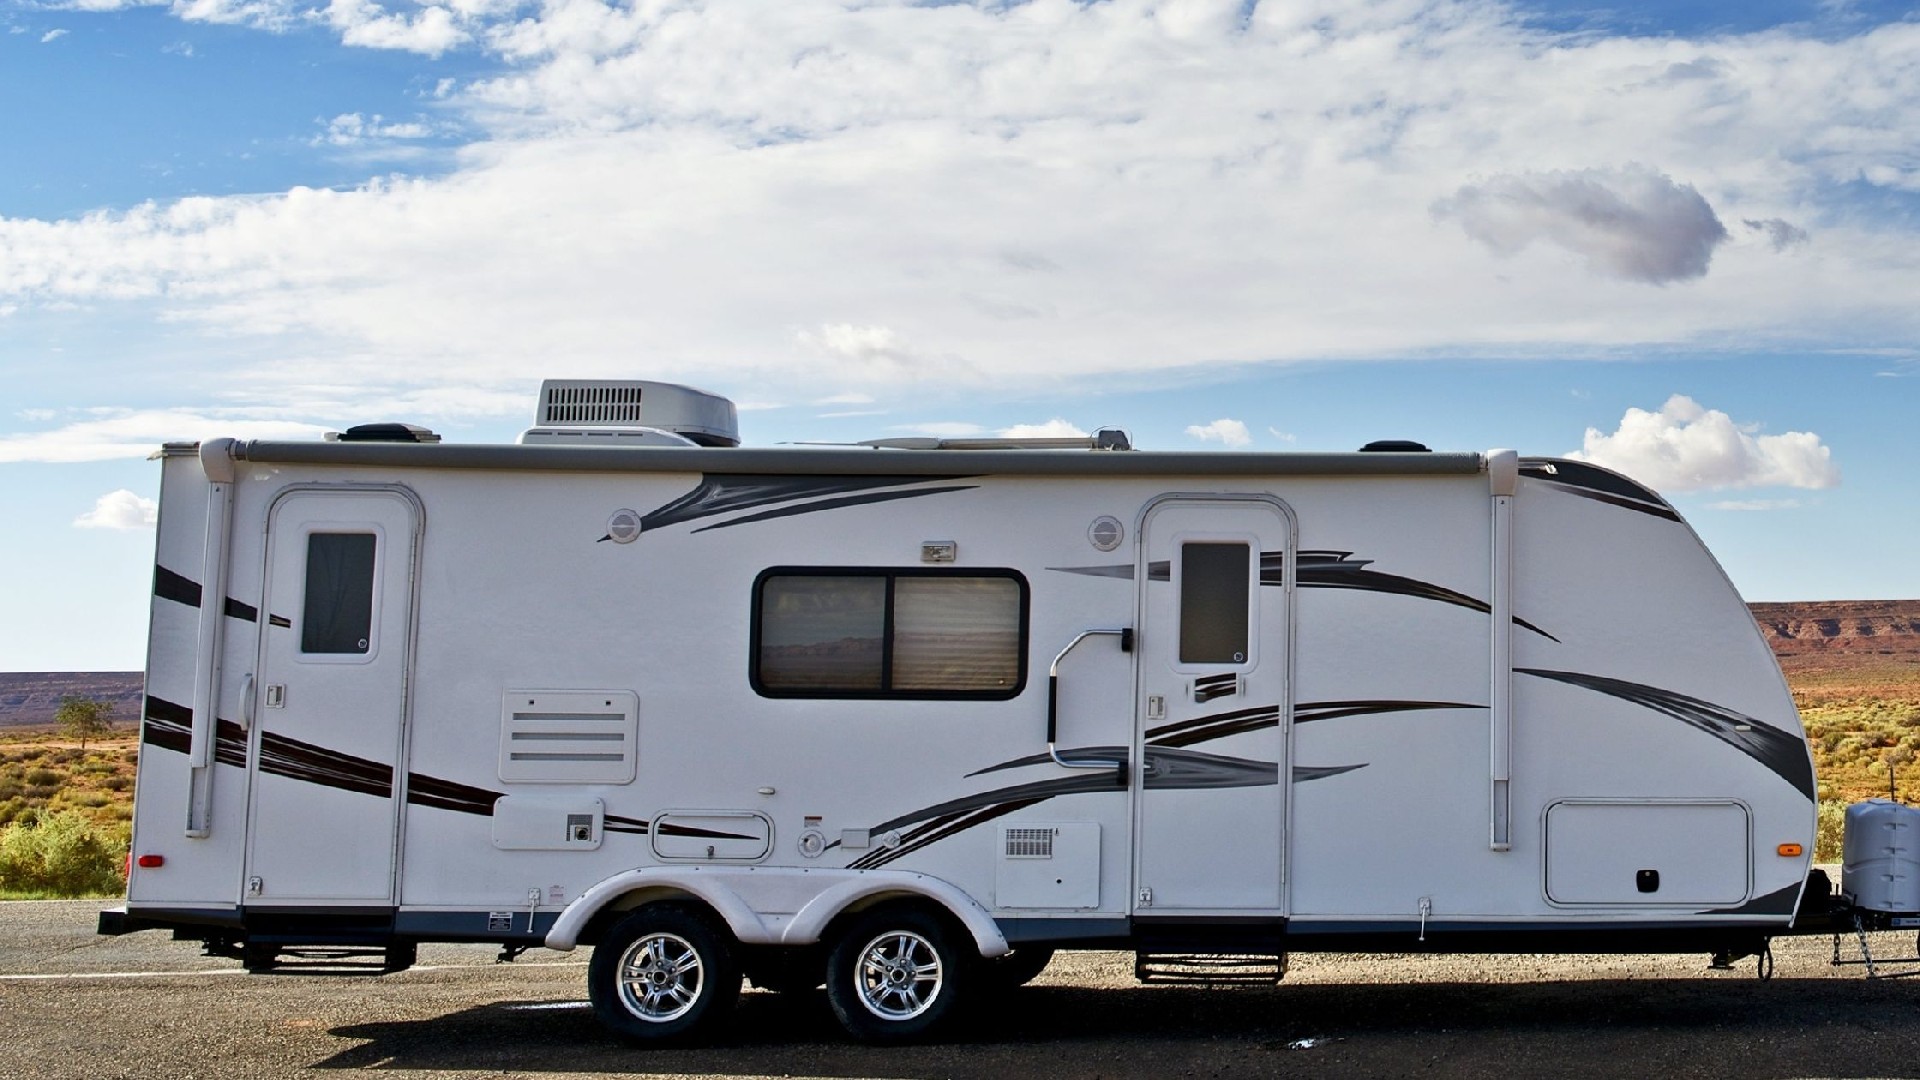 Must Have Travel Trailer Accessories: The Complete List with 71 Items